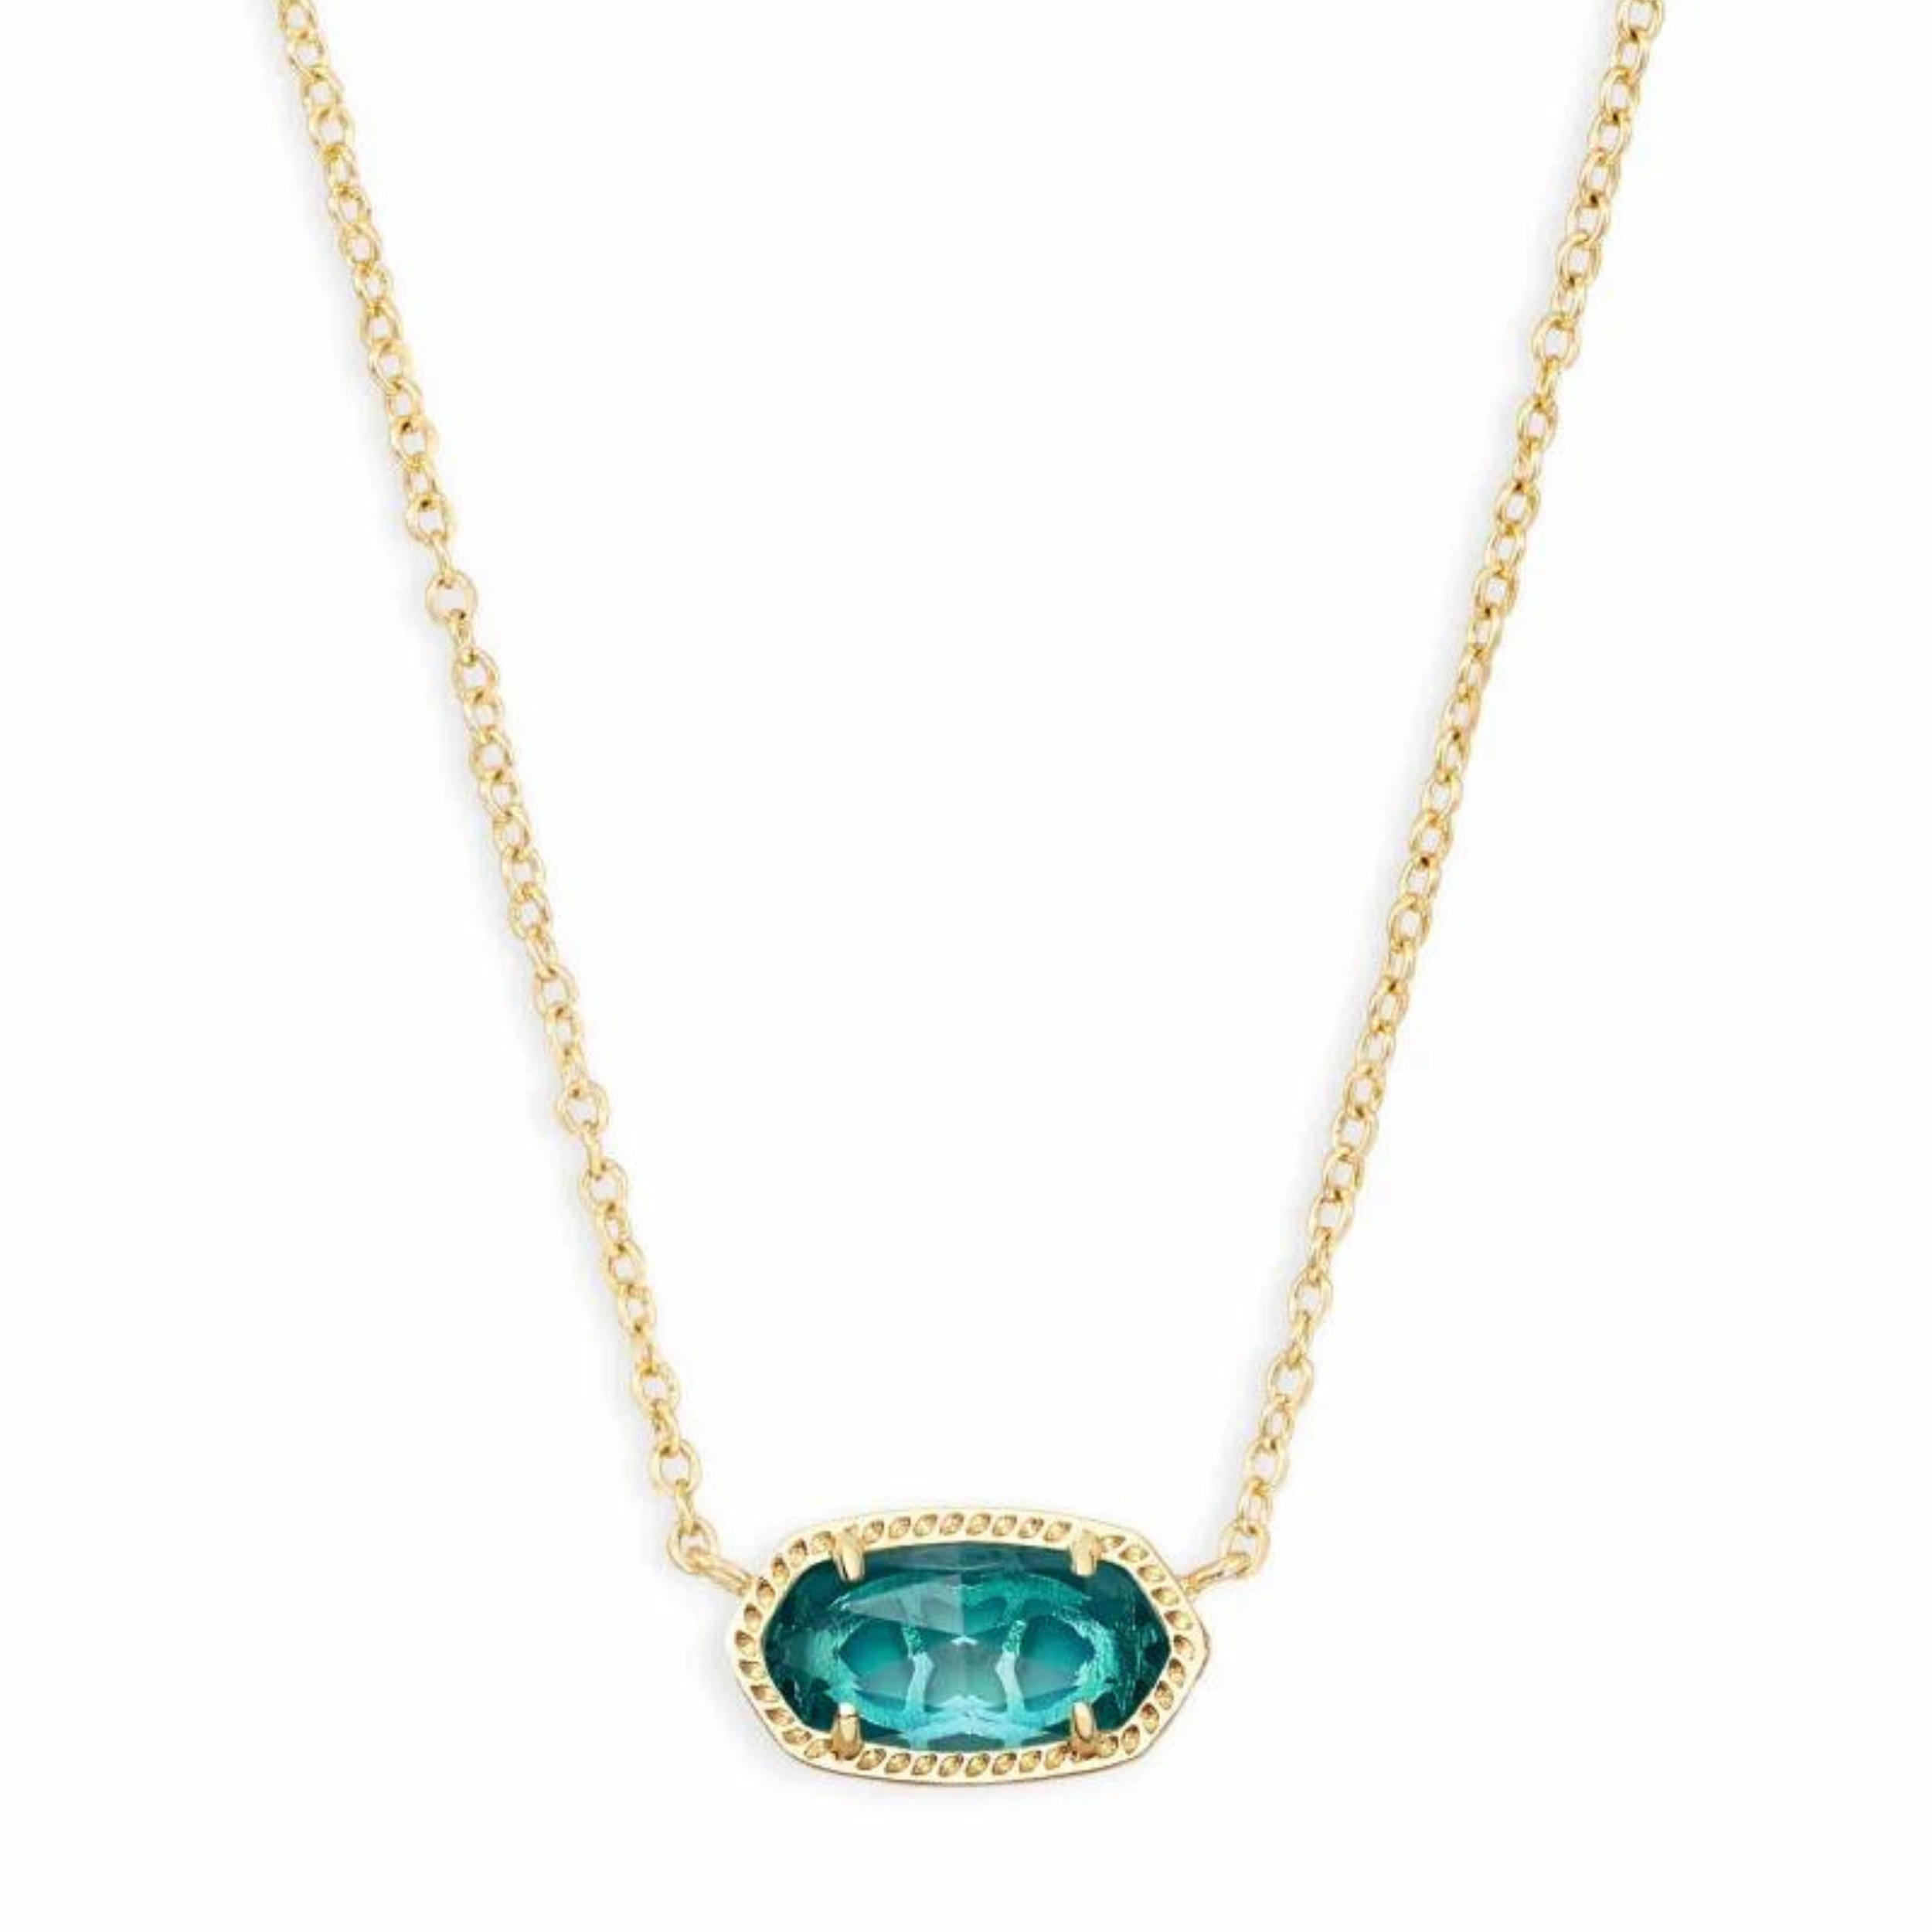 Gold necklace with london blue pendant, pictured on a white background.